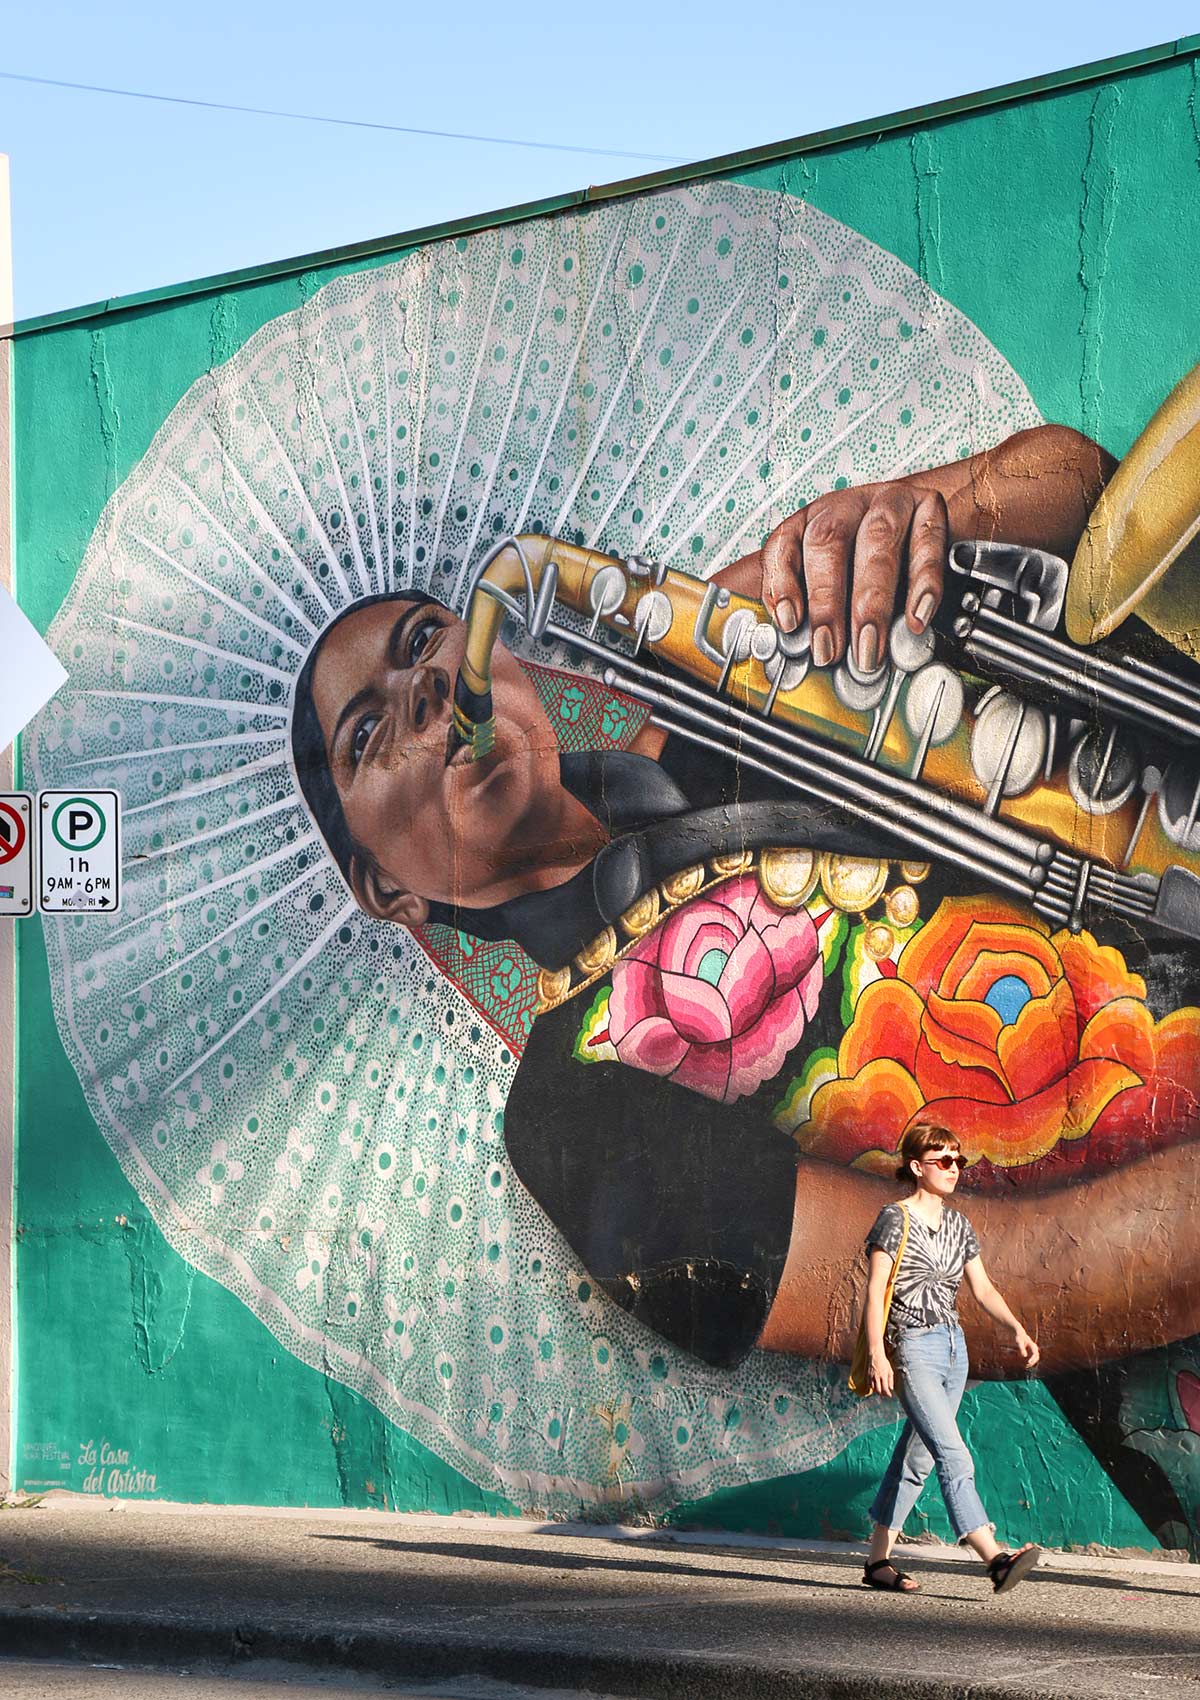 Mount Pleasants, Irving Cano, Murale, Vancouver, Colombie-Britannique, Canada / Irving Cano, Mural, Vancouver, BC, Canada